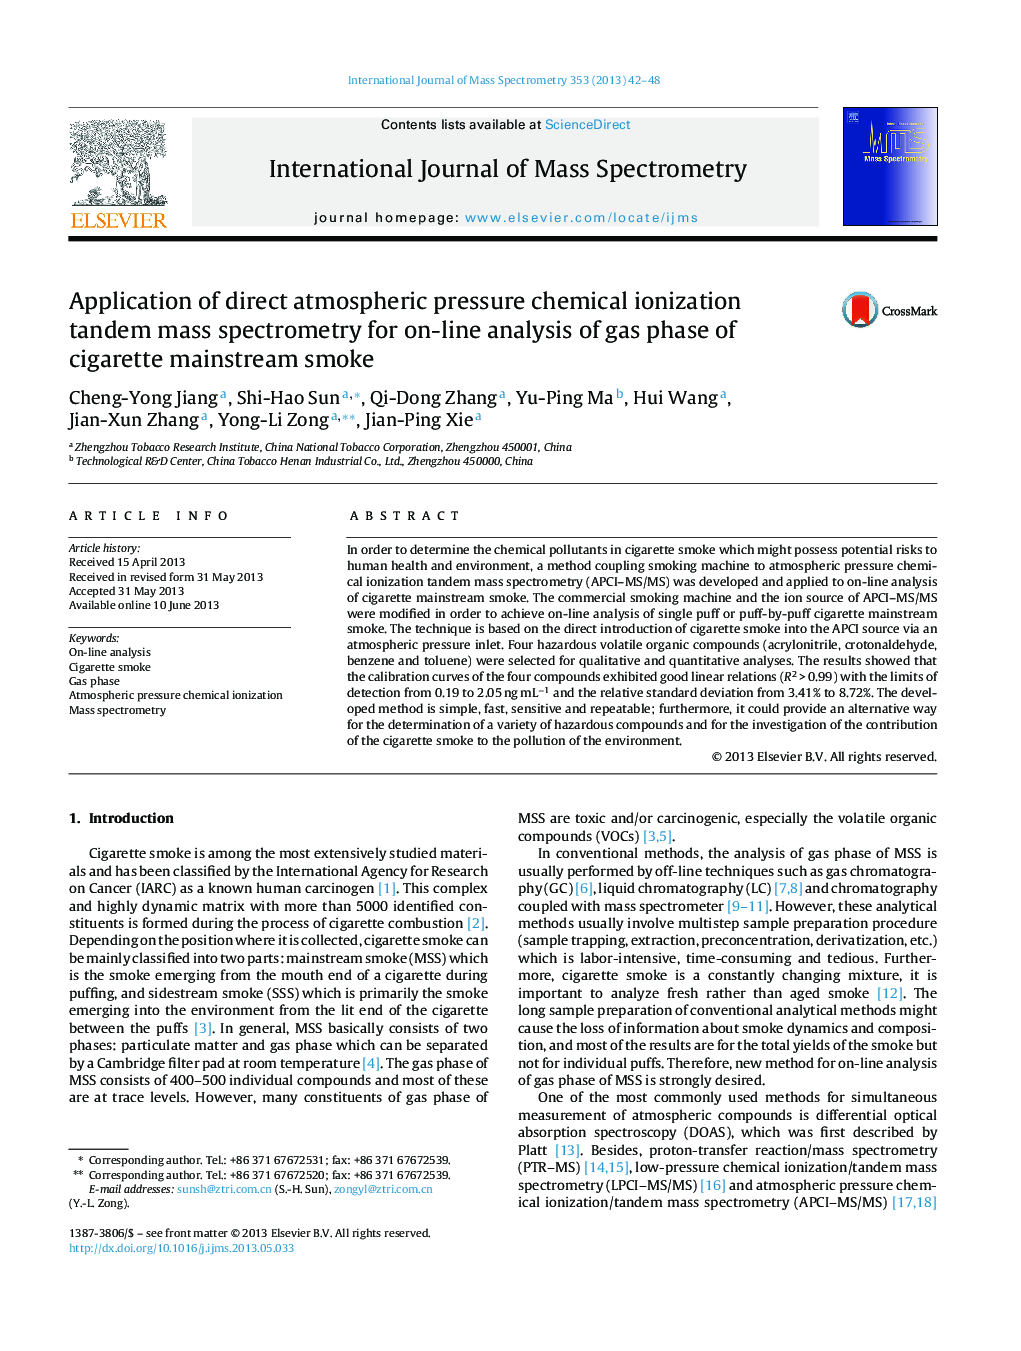 Application of direct atmospheric pressure chemical ionization tandem mass spectrometry for on-line analysis of gas phase of cigarette mainstream smoke